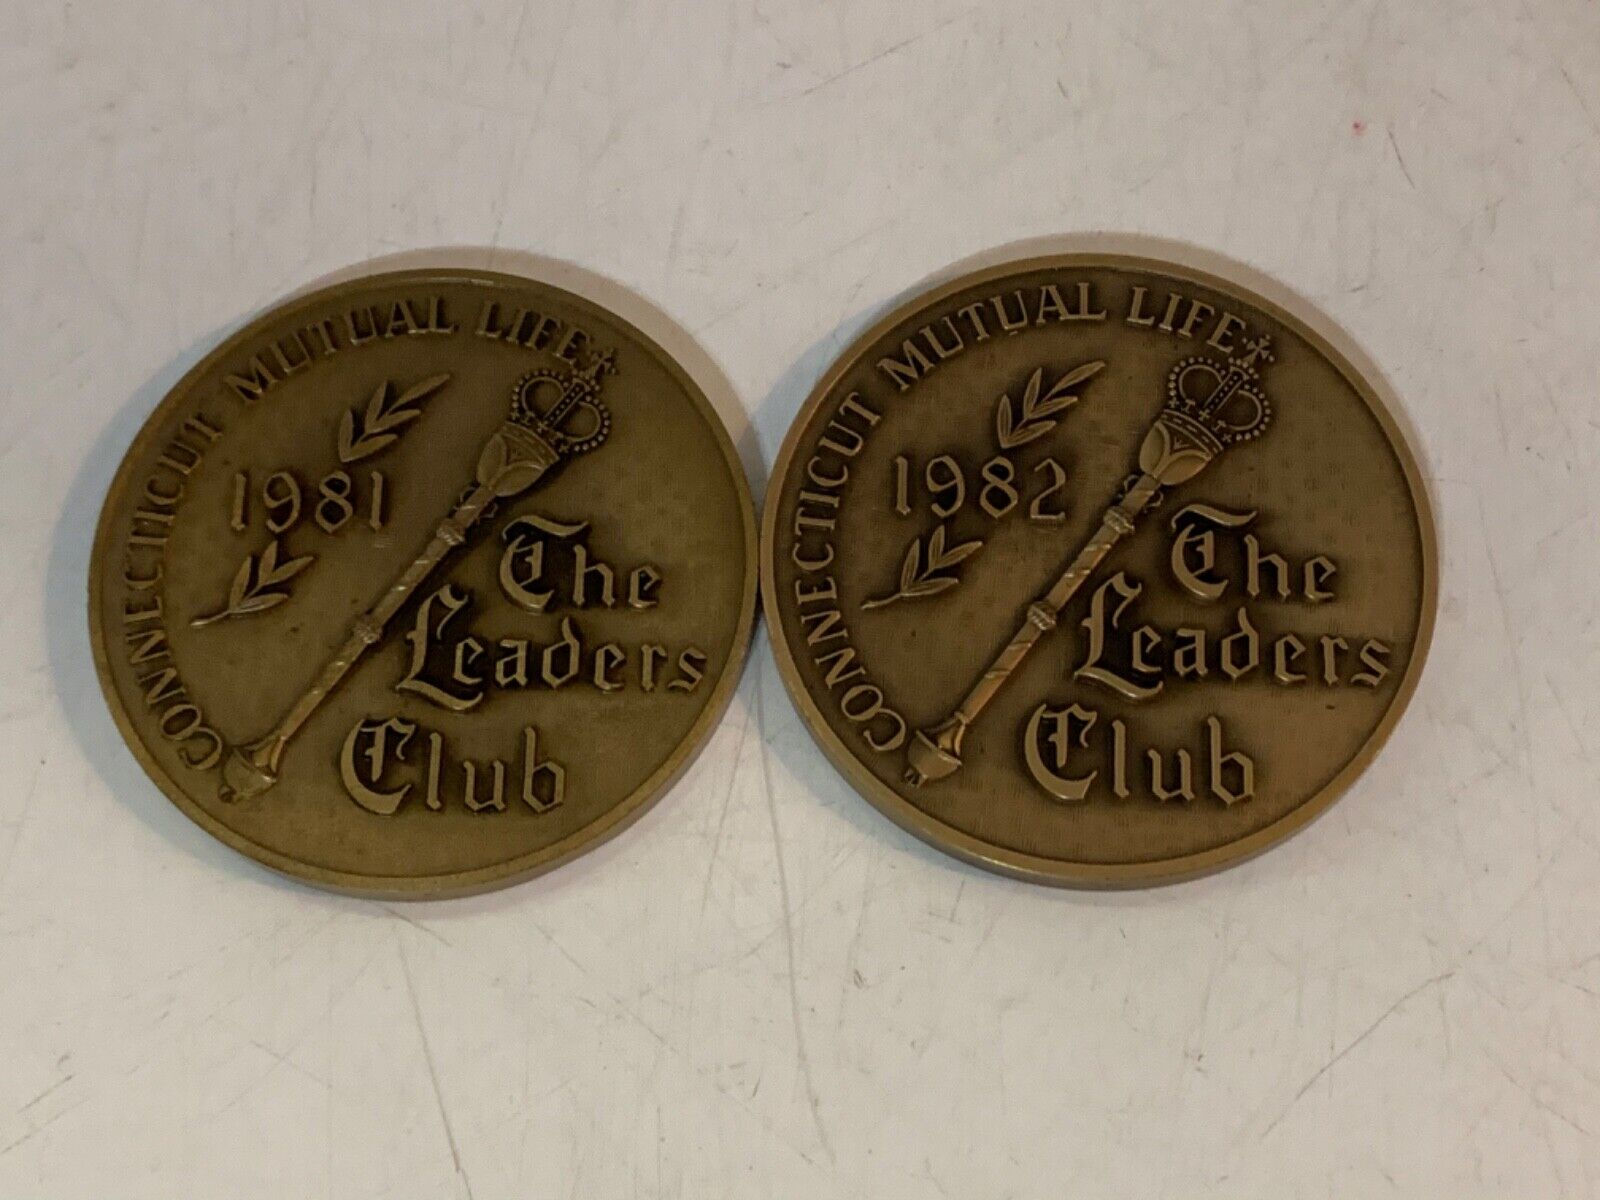 Vintage Connecticut Mutal Life “The Leaders Club”1981 and 1982 Medallions